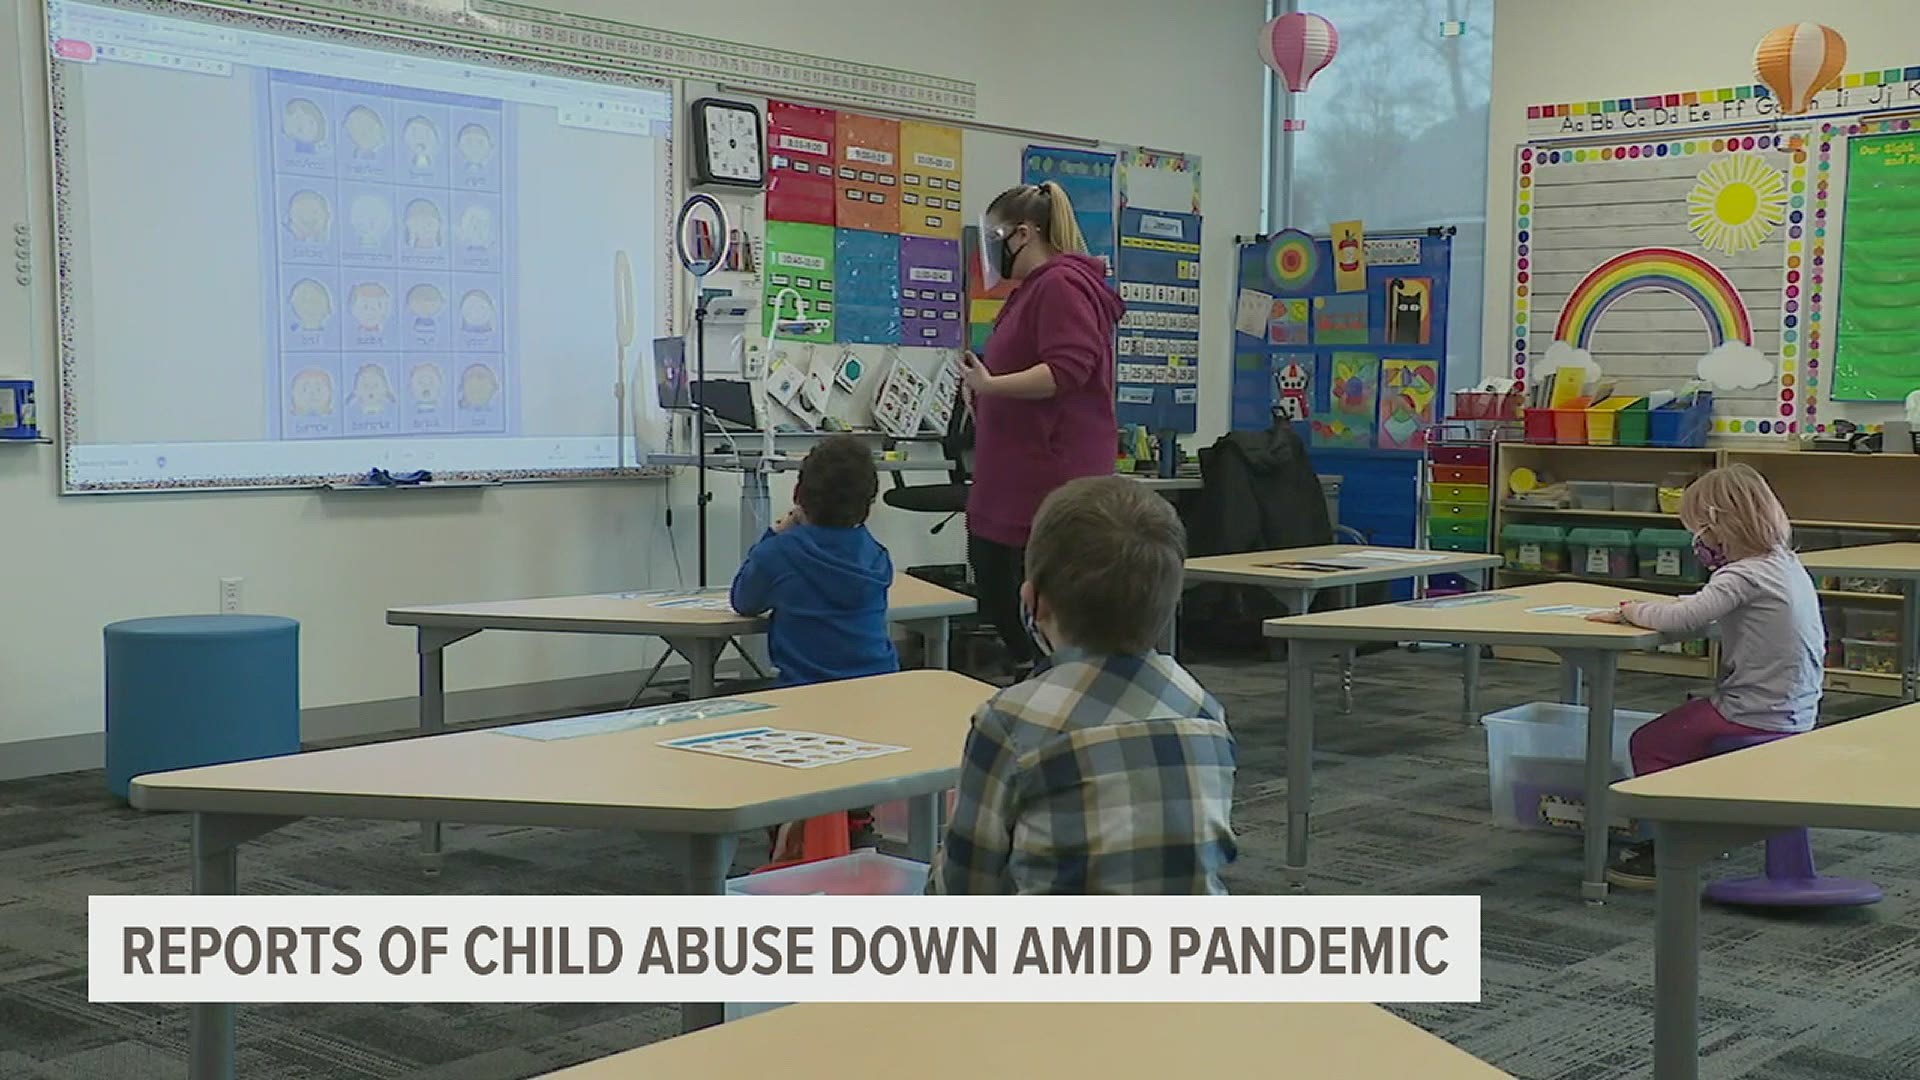 A year into the pandemic, calls to report suspected child abuse are still down, but officials say abuse probably isn't.